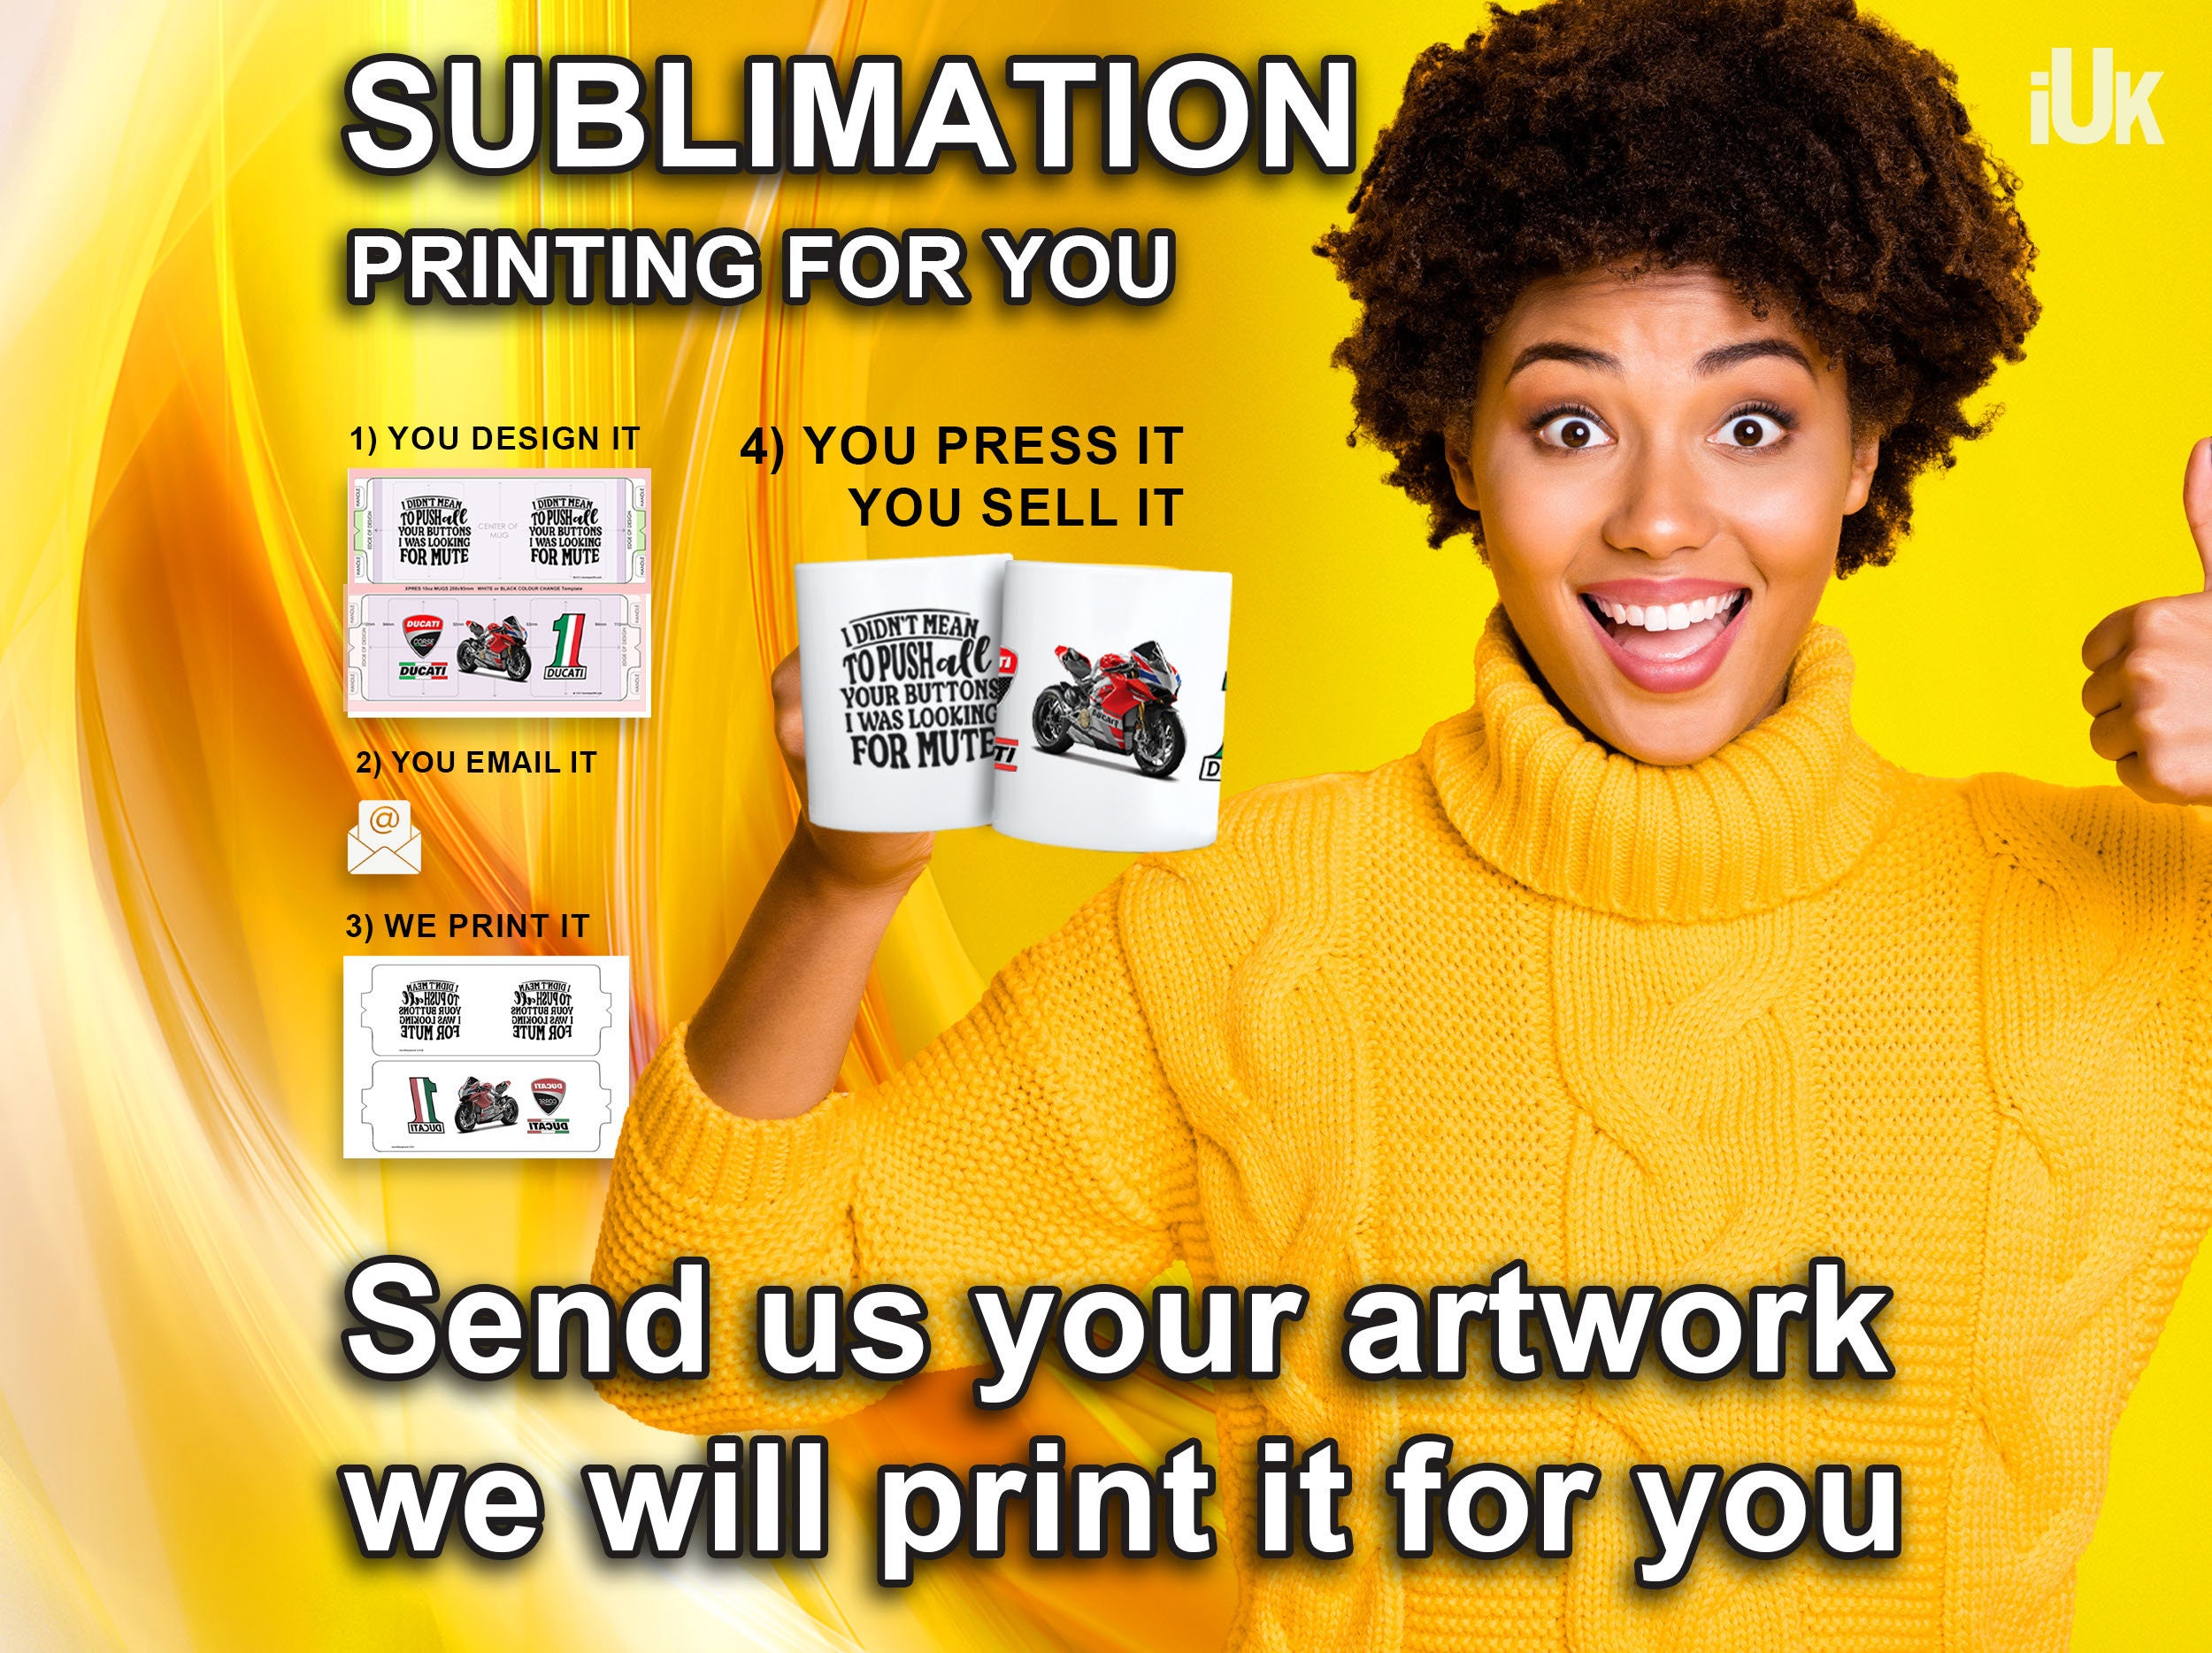 Silicone Overlay Sheets, 100 Sublimation Cover Sheets, Sublimation